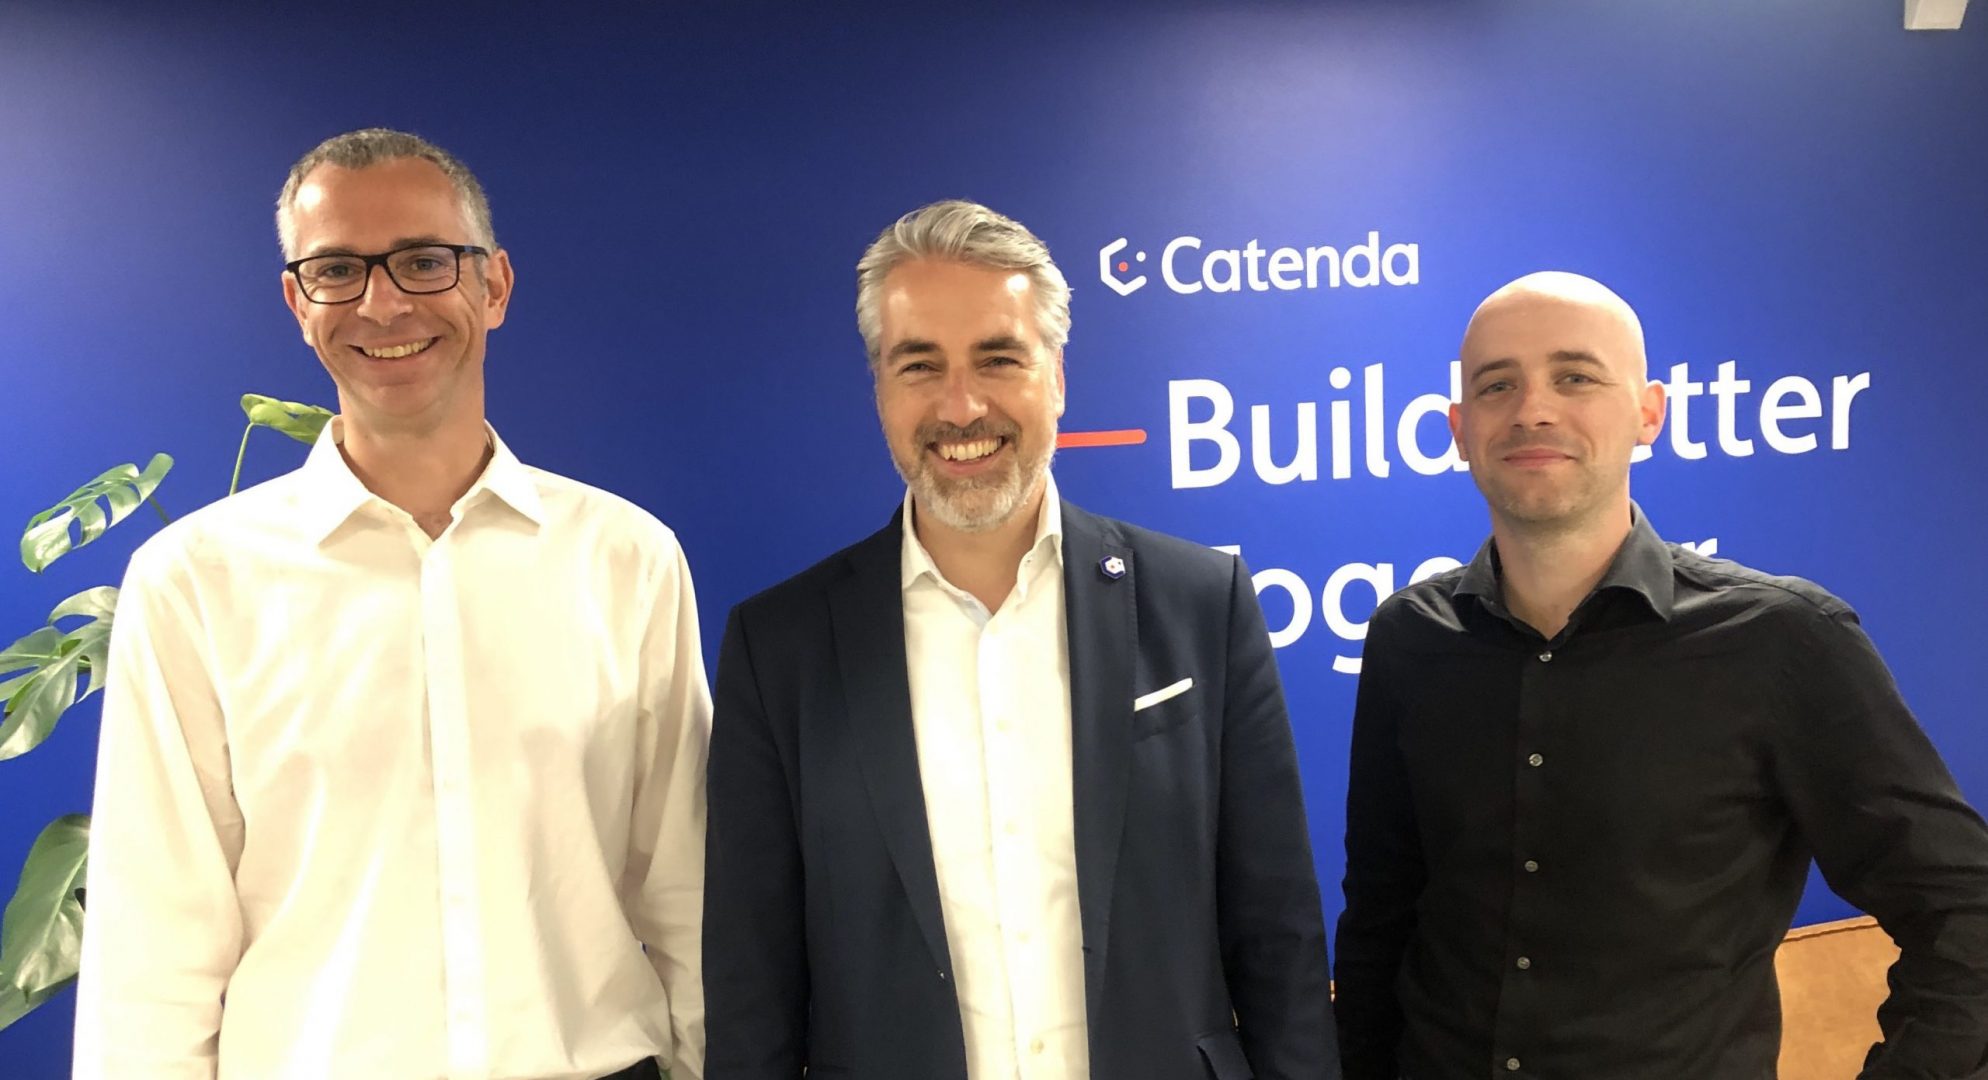 Catenda has acquired VTREEM, French software startup specialized in BIM